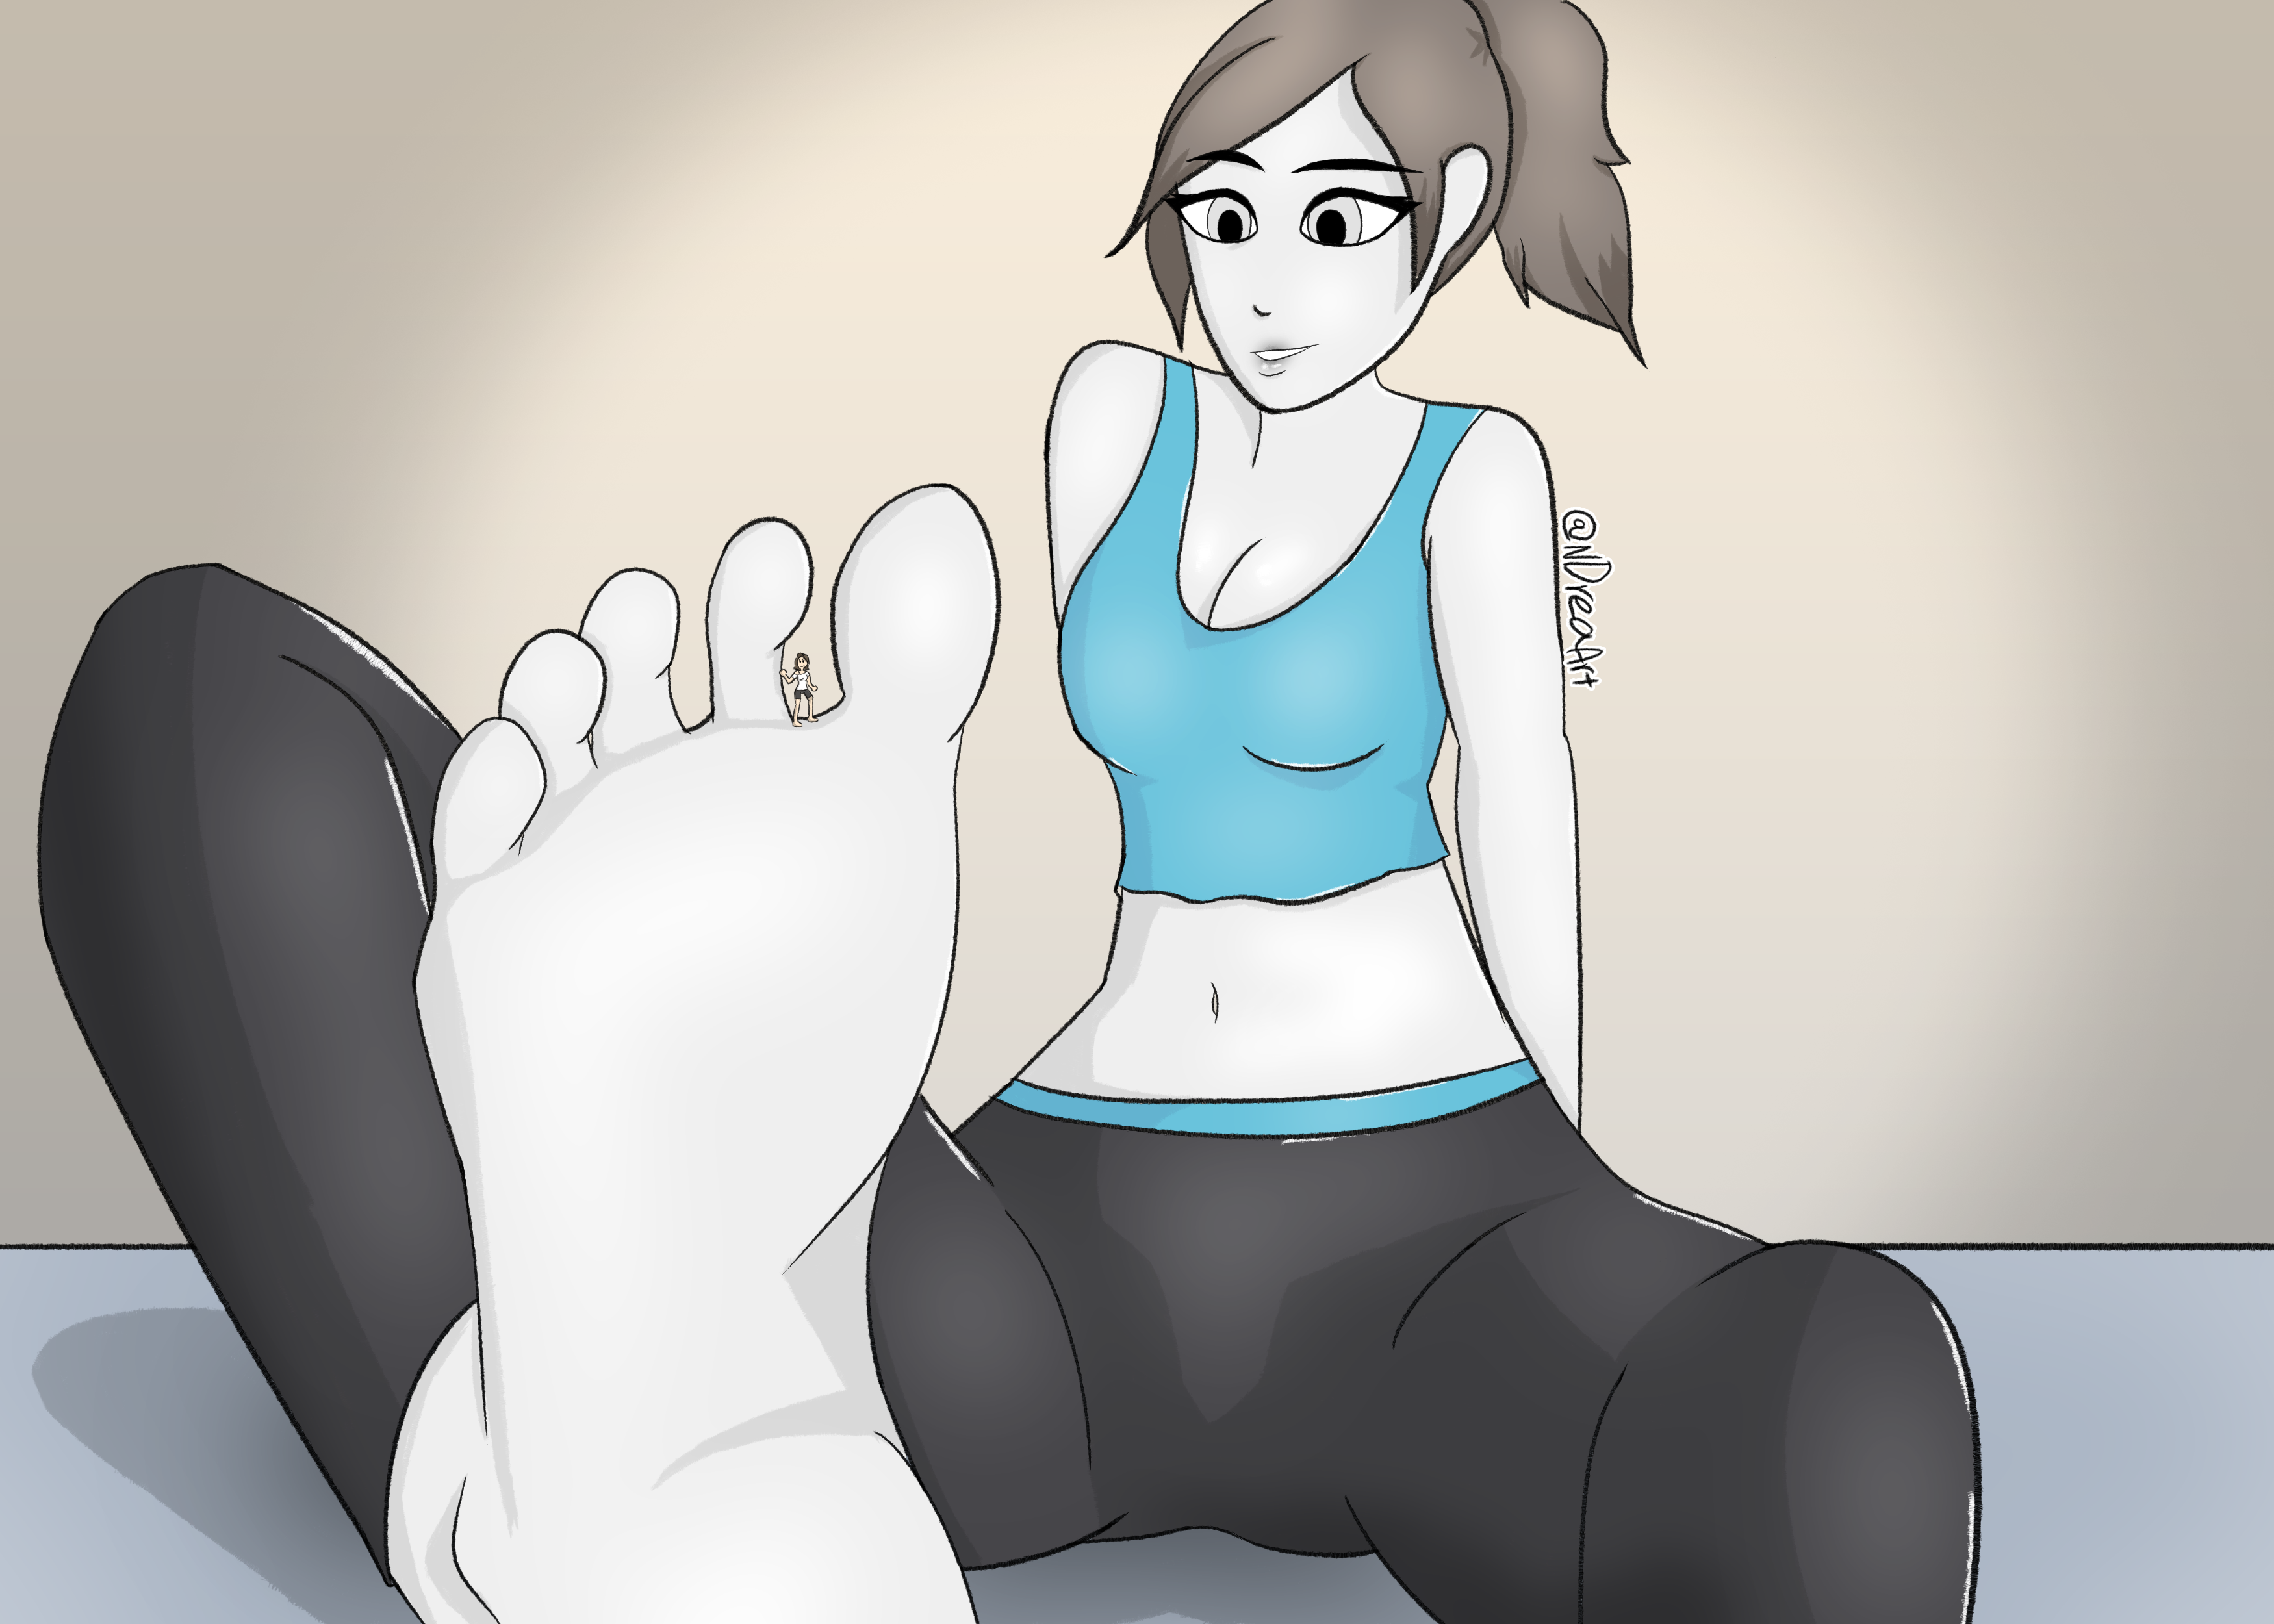 wii fit trainer, wii fit, feet, foot fetish, foot focus, giant, giantess, m...